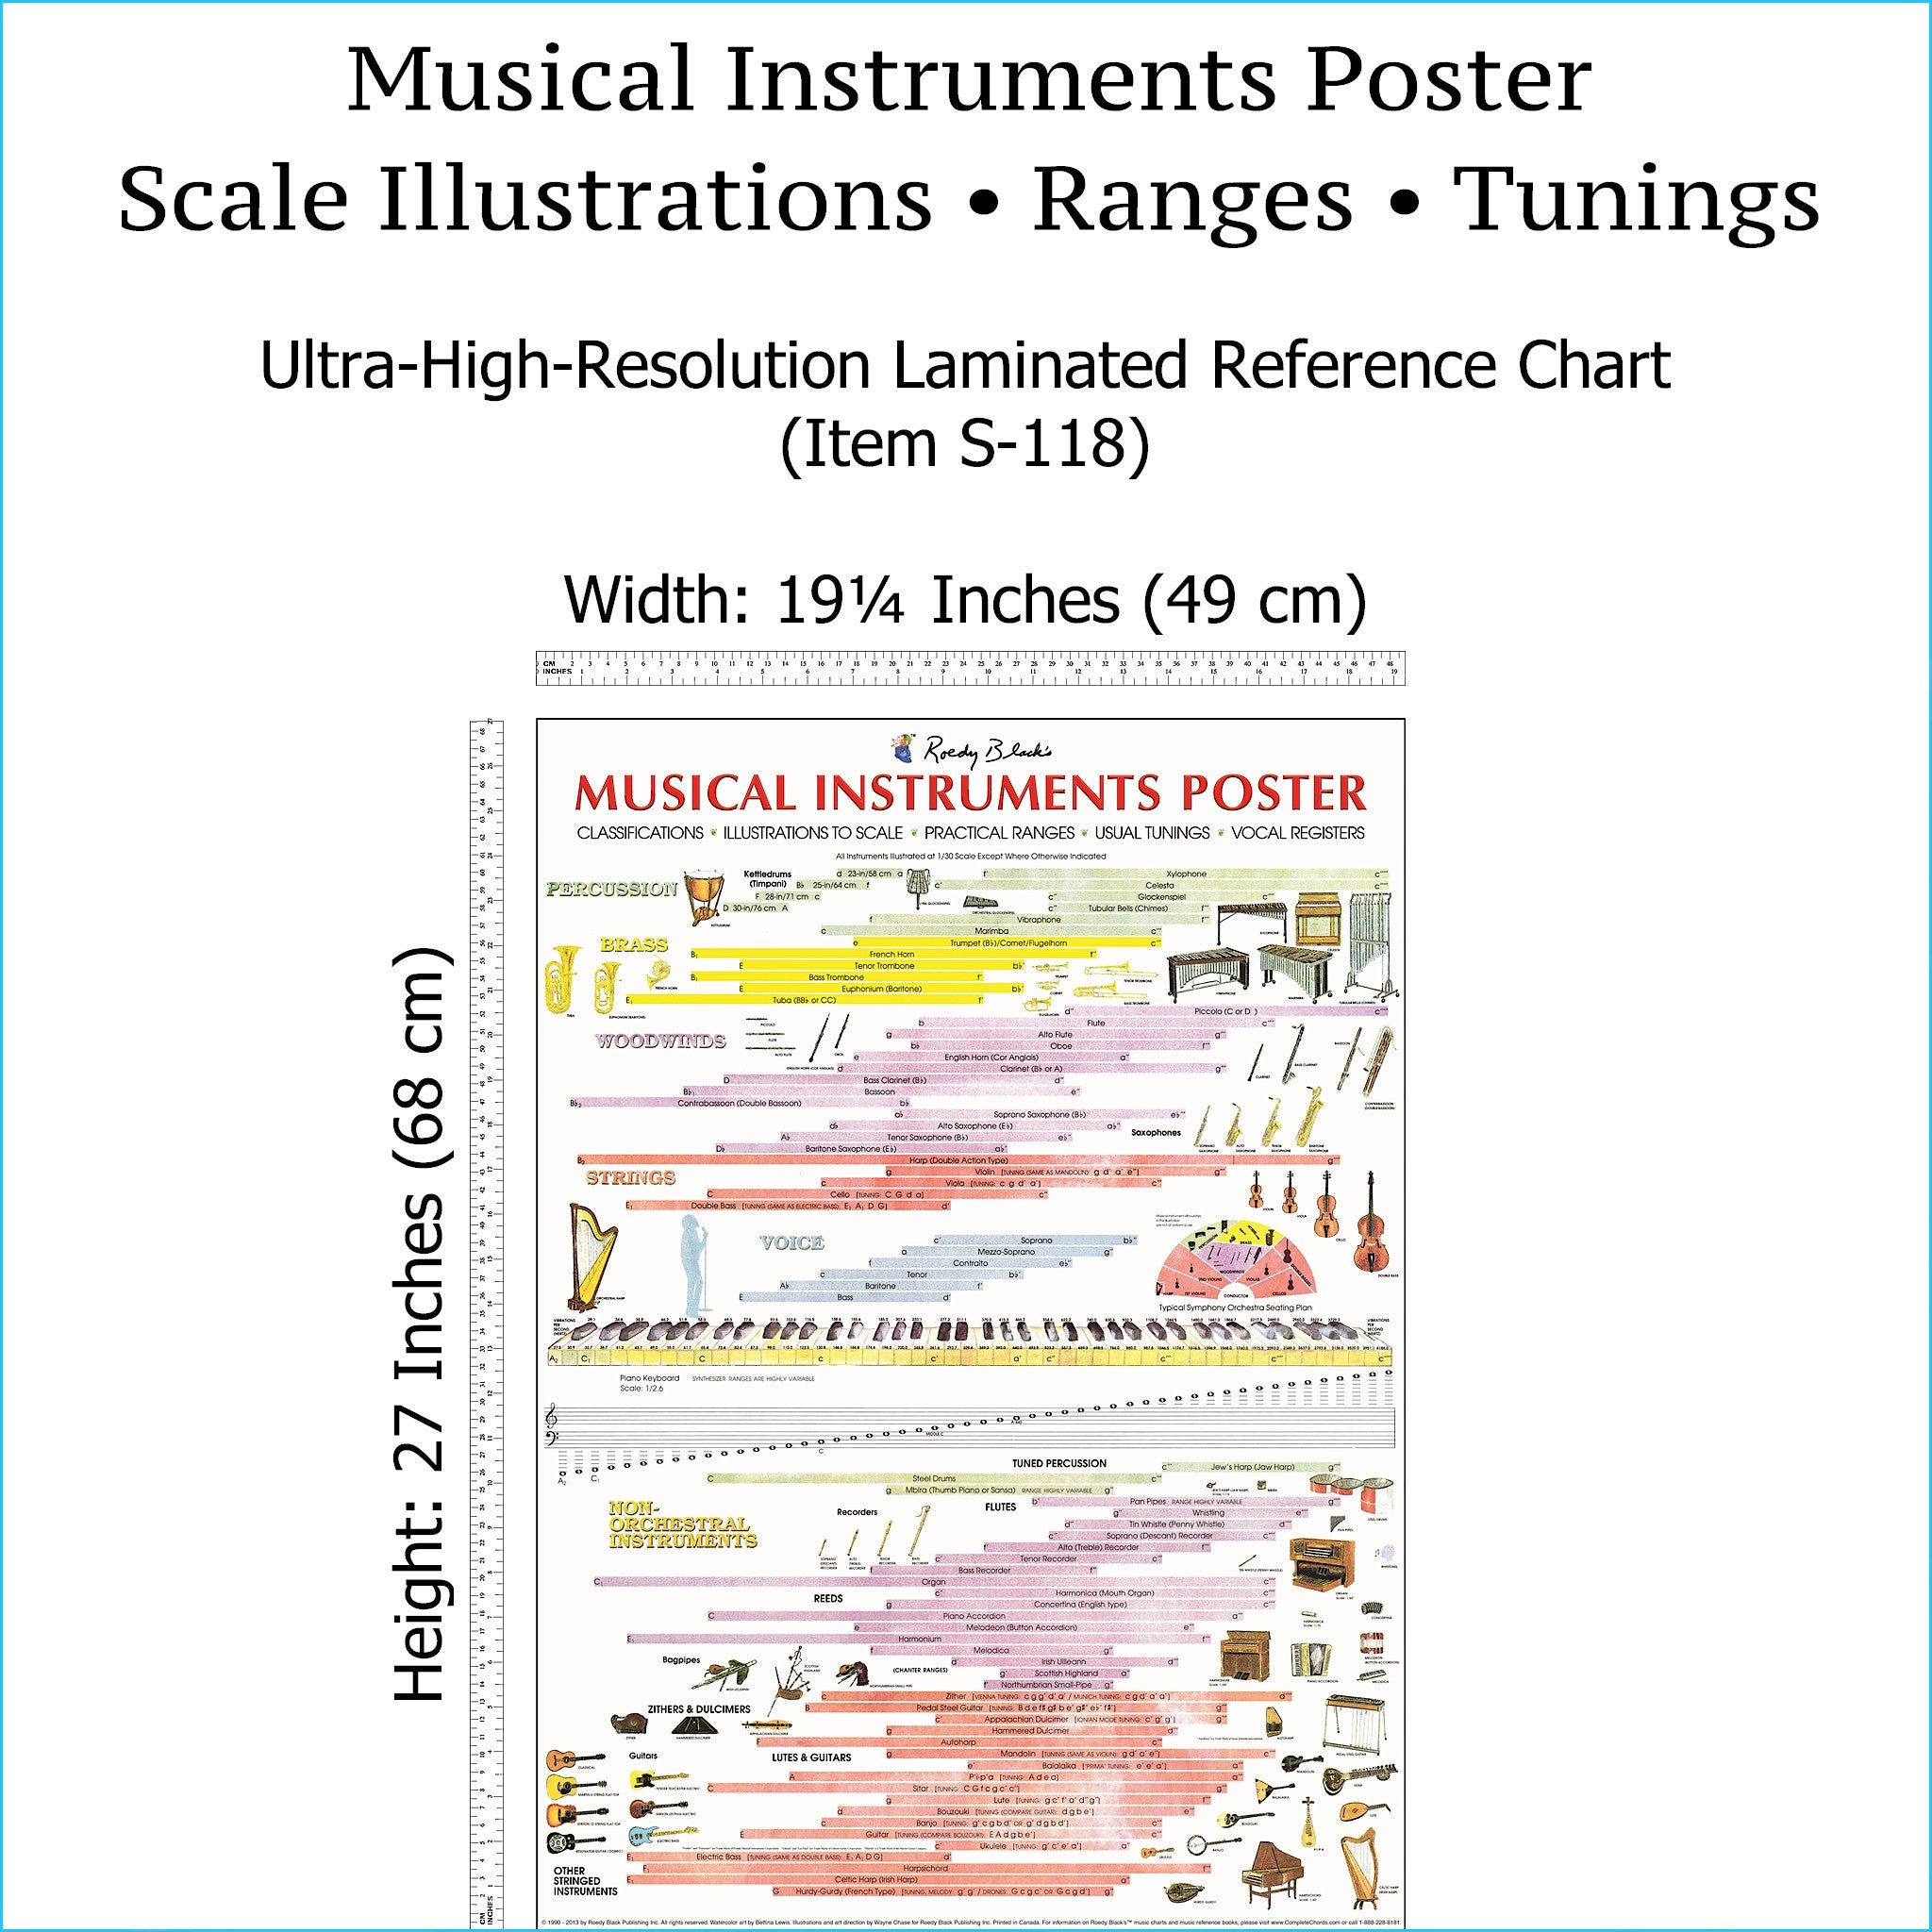 Full view of musical instruments poster.